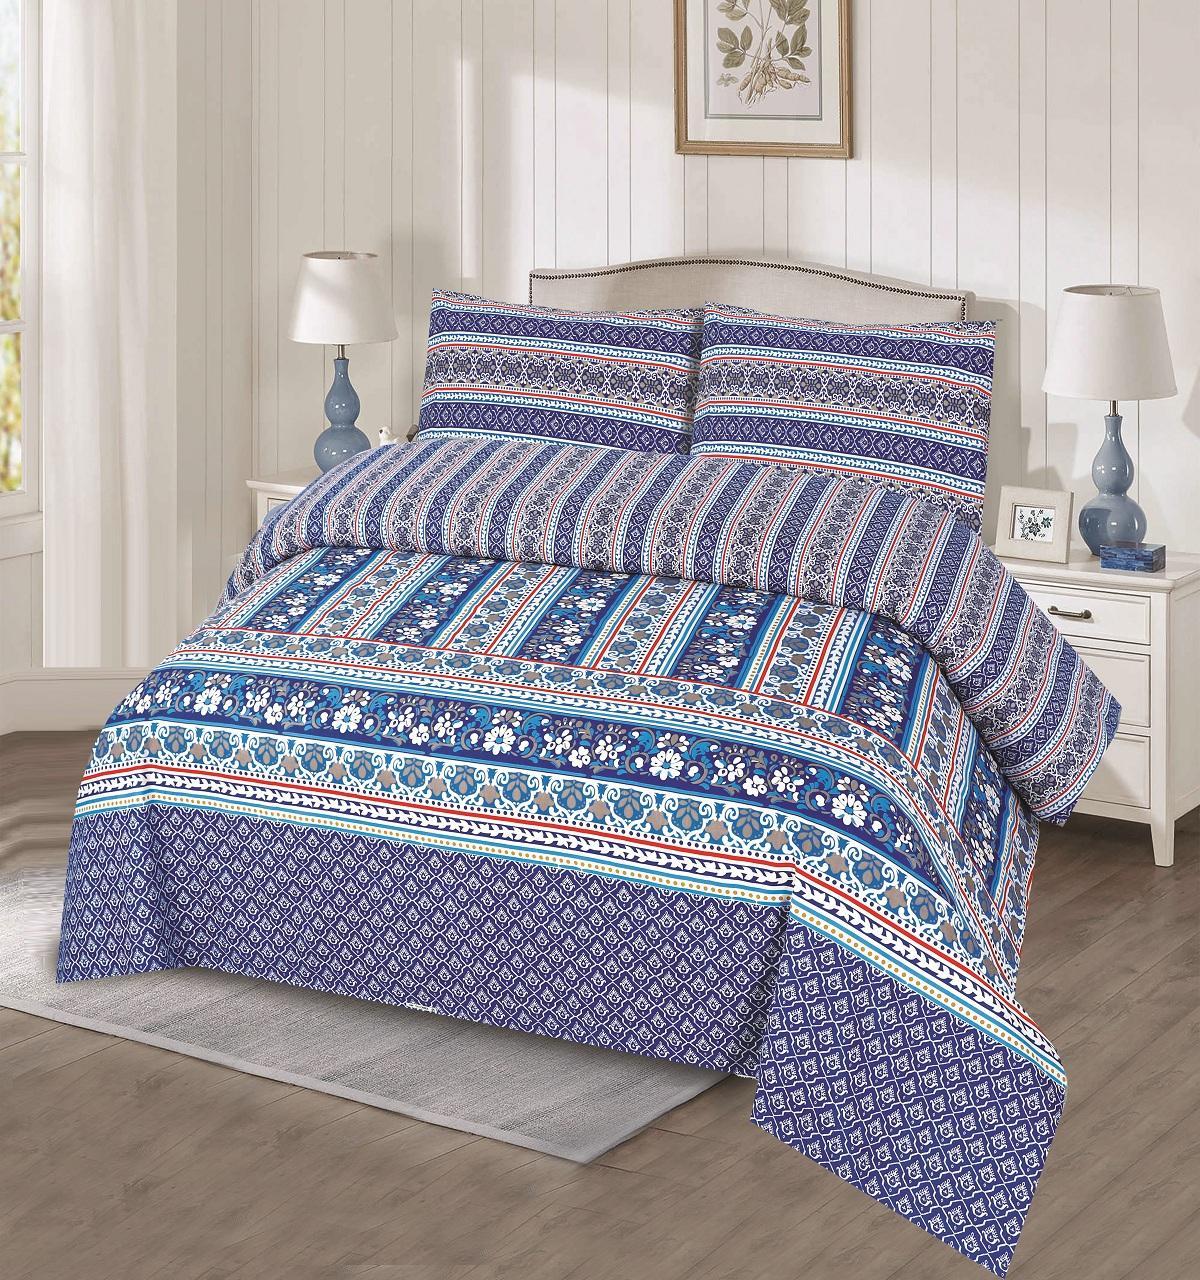 Striped Blue Bed Sheet # 781 1